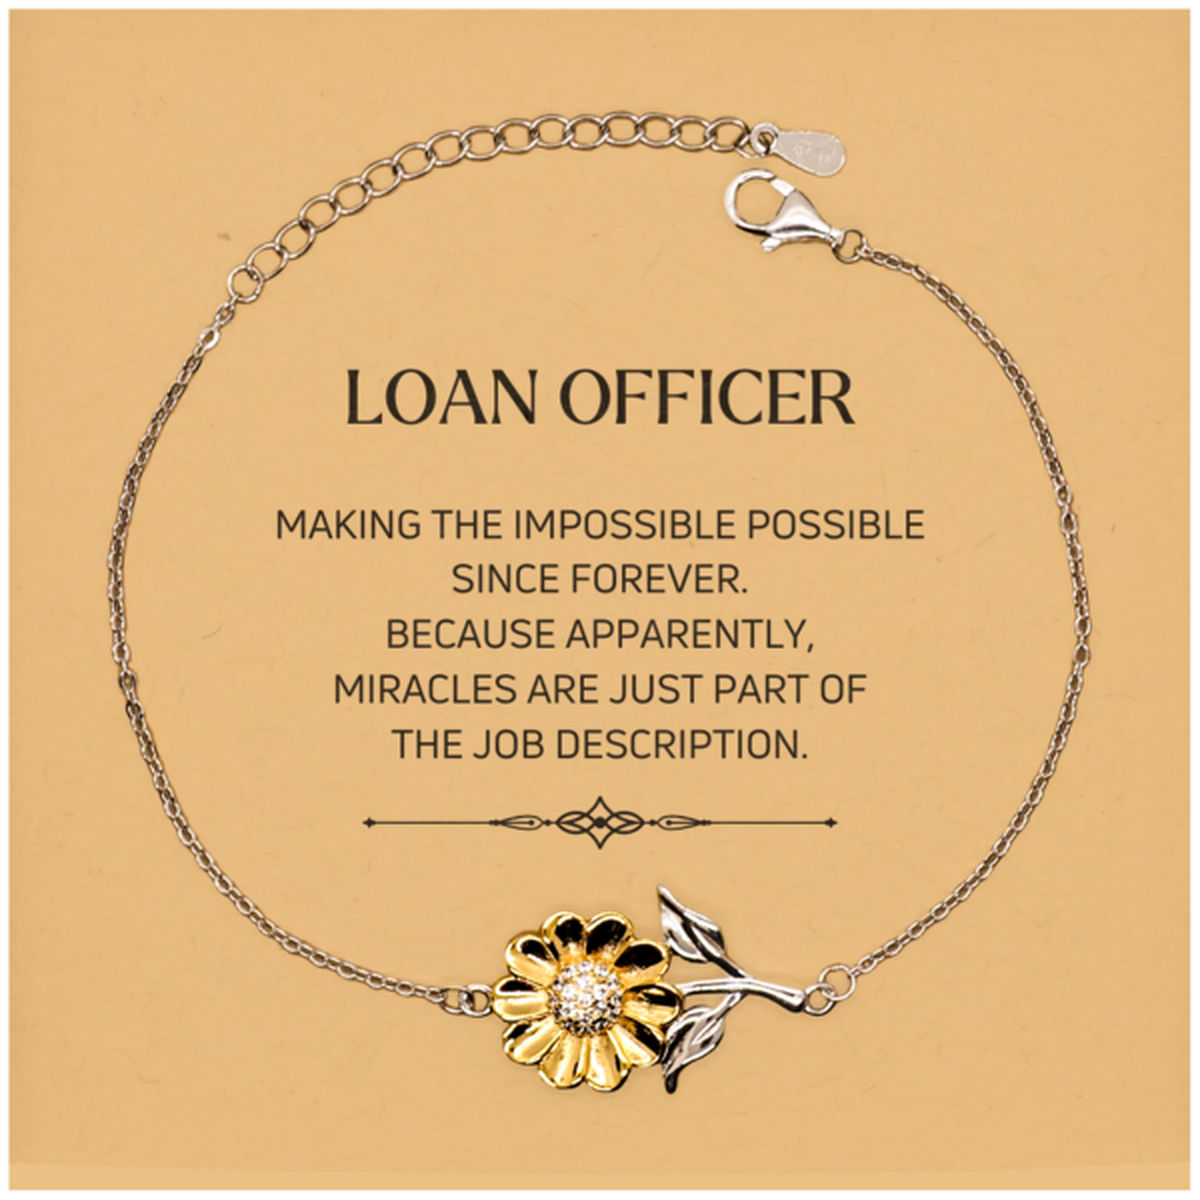 Funny Loan Officer Gifts, Miracles are just part of the job description, Inspirational Birthday Christmas Sunflower Bracelet For Loan Officer, Men, Women, Coworkers, Friends, Boss